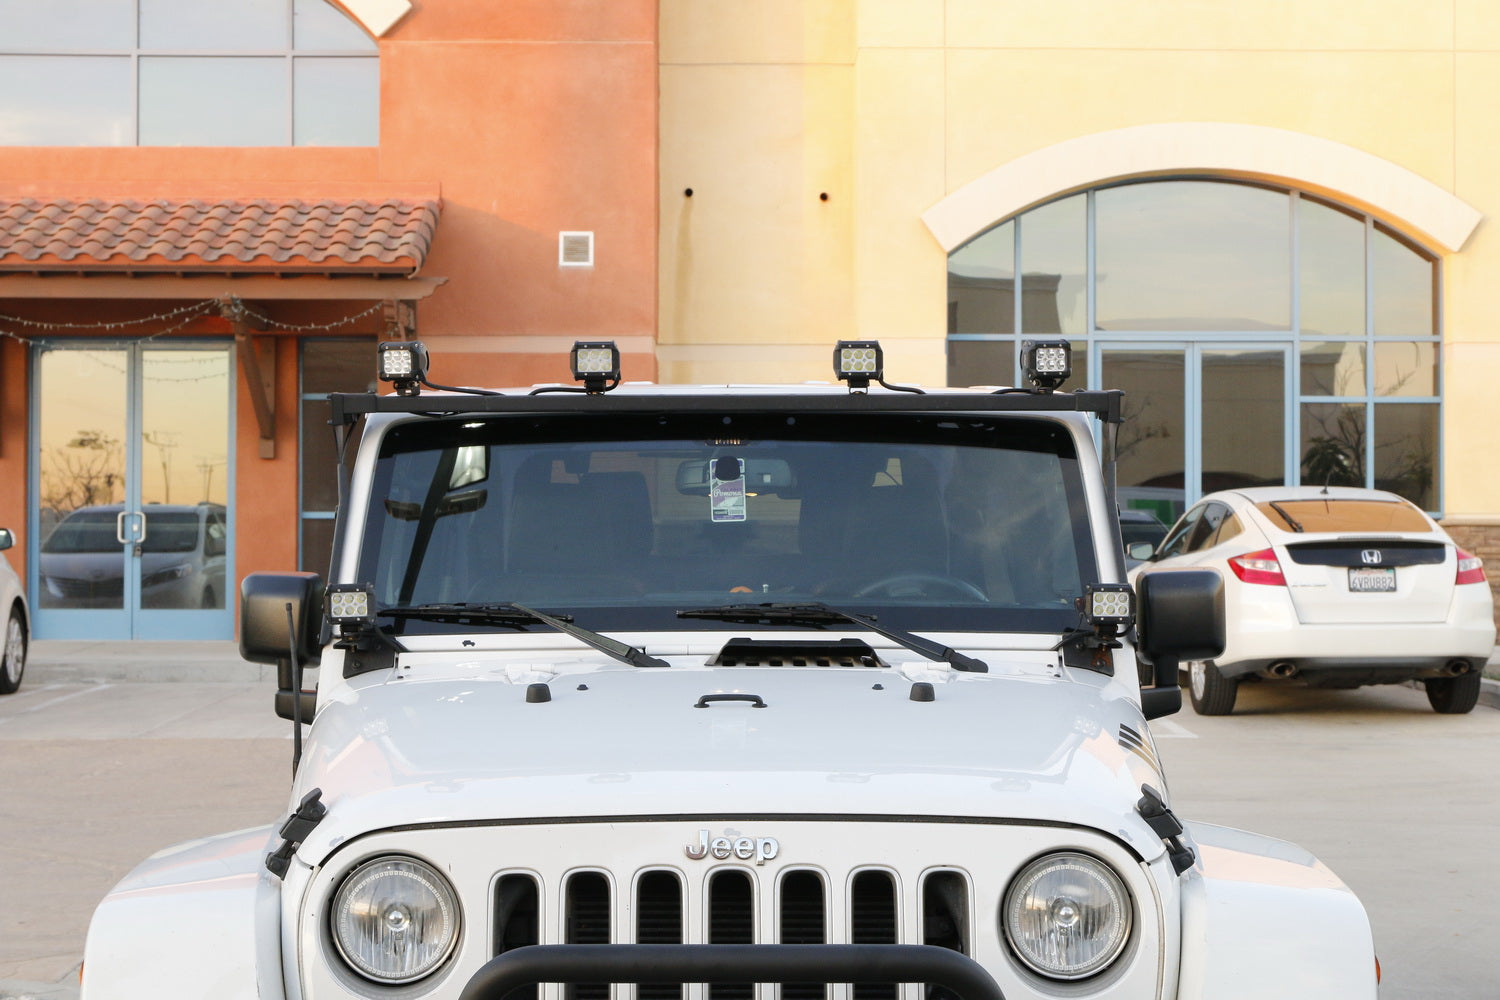 How Many LED Lights Can You Equip Onto a Jeep Wrangler?